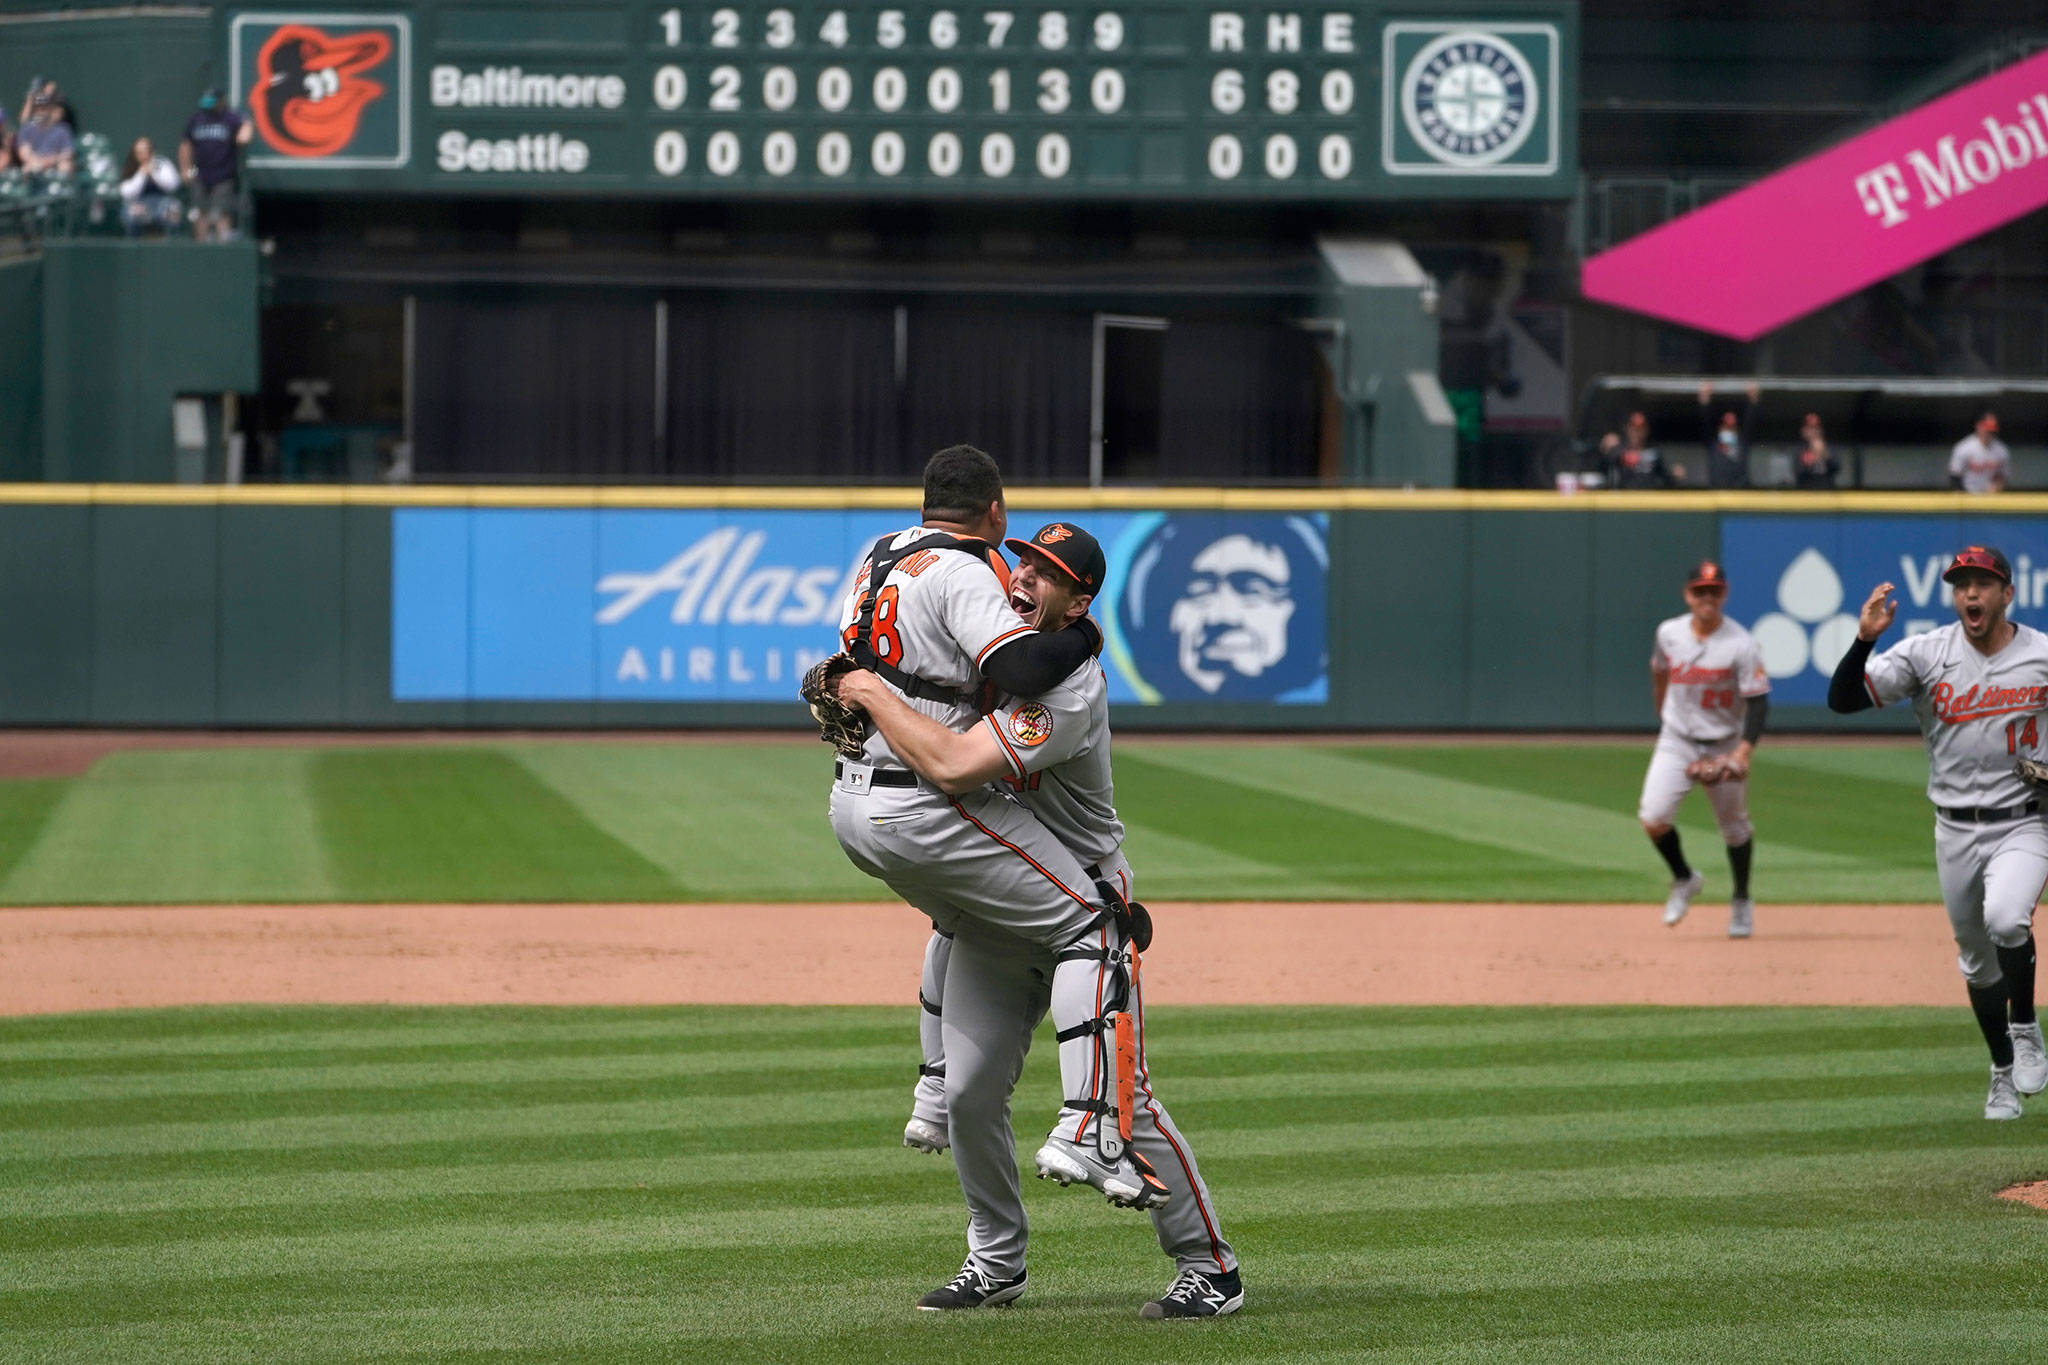 Orioles starting pitcher John Means (right) hugs catcher Pedro Severino after Means threw a no-hitter against the Mariners on May 5, 2021, in Seattle. (AP Photo/Ted S. Warren)